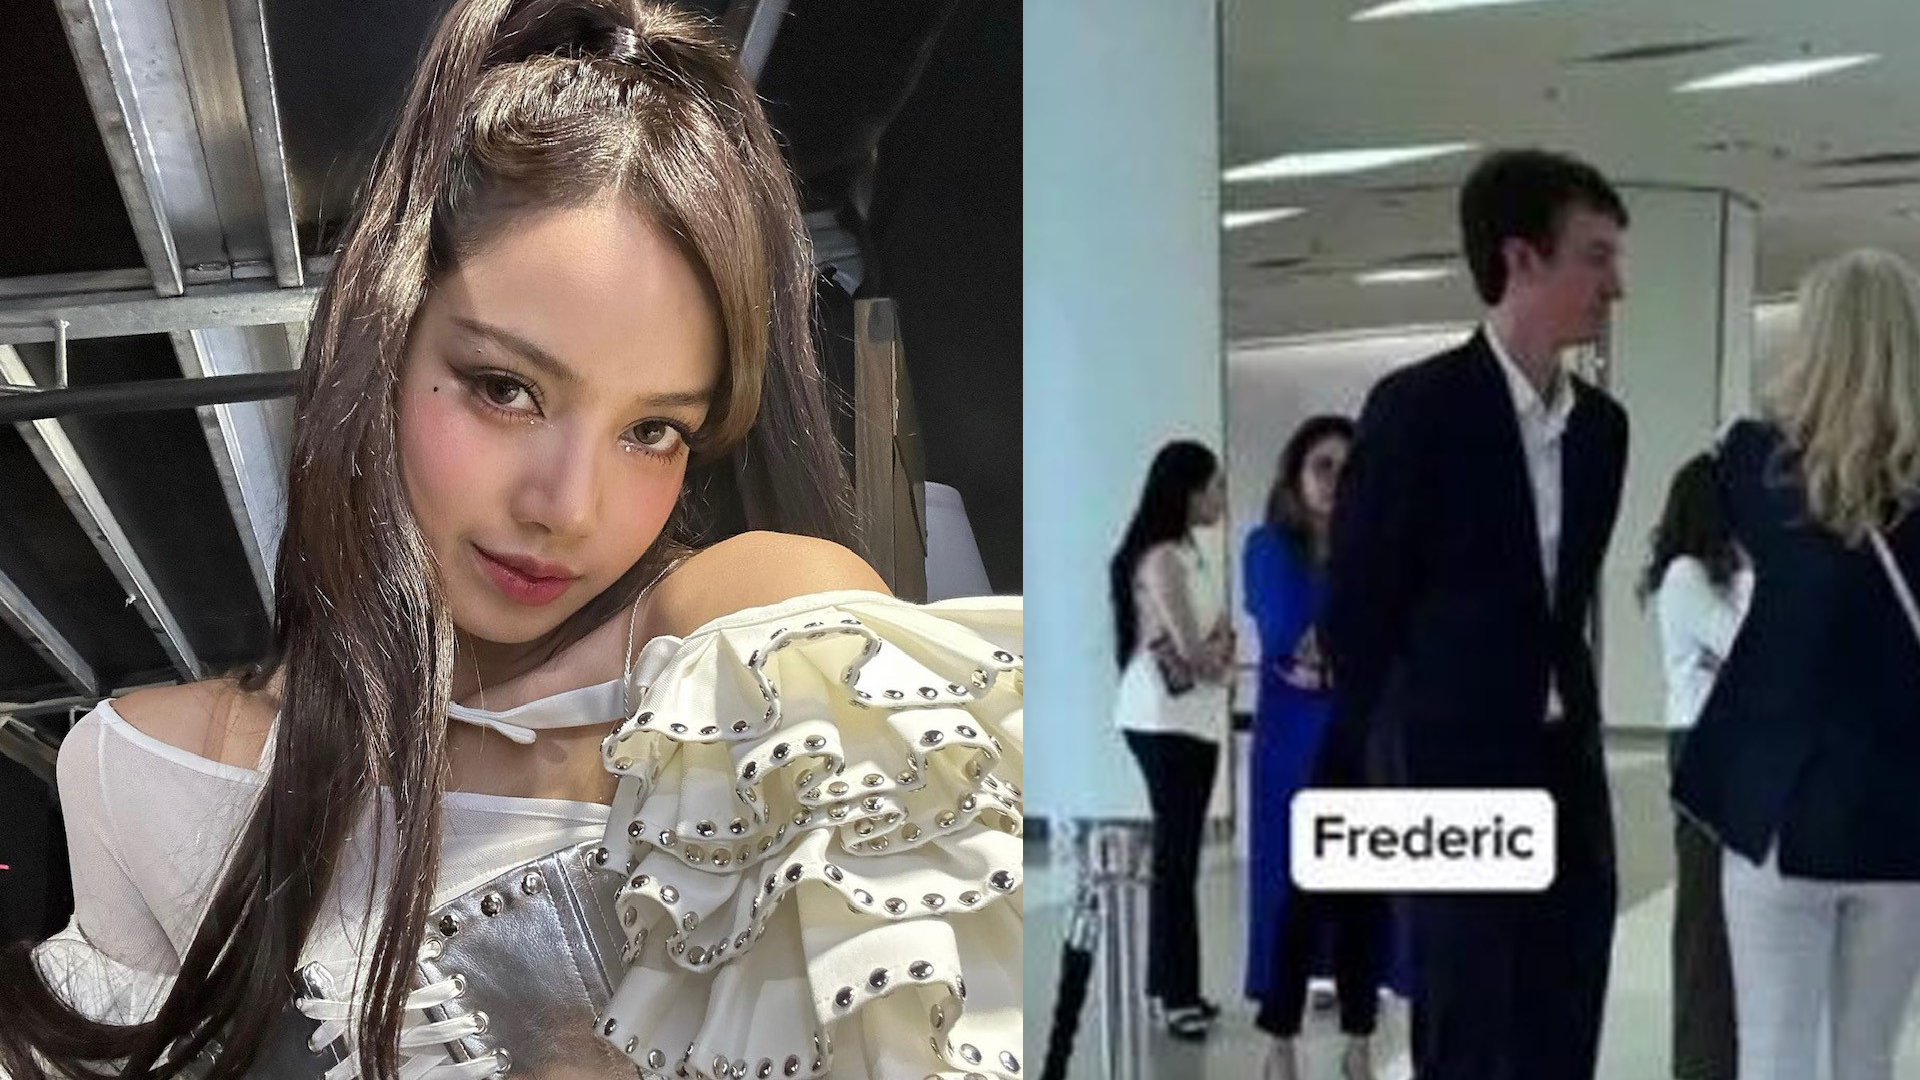 Blackpink's Lisa and Rumoured Boyfriend Tag Heuer CEO Frederic